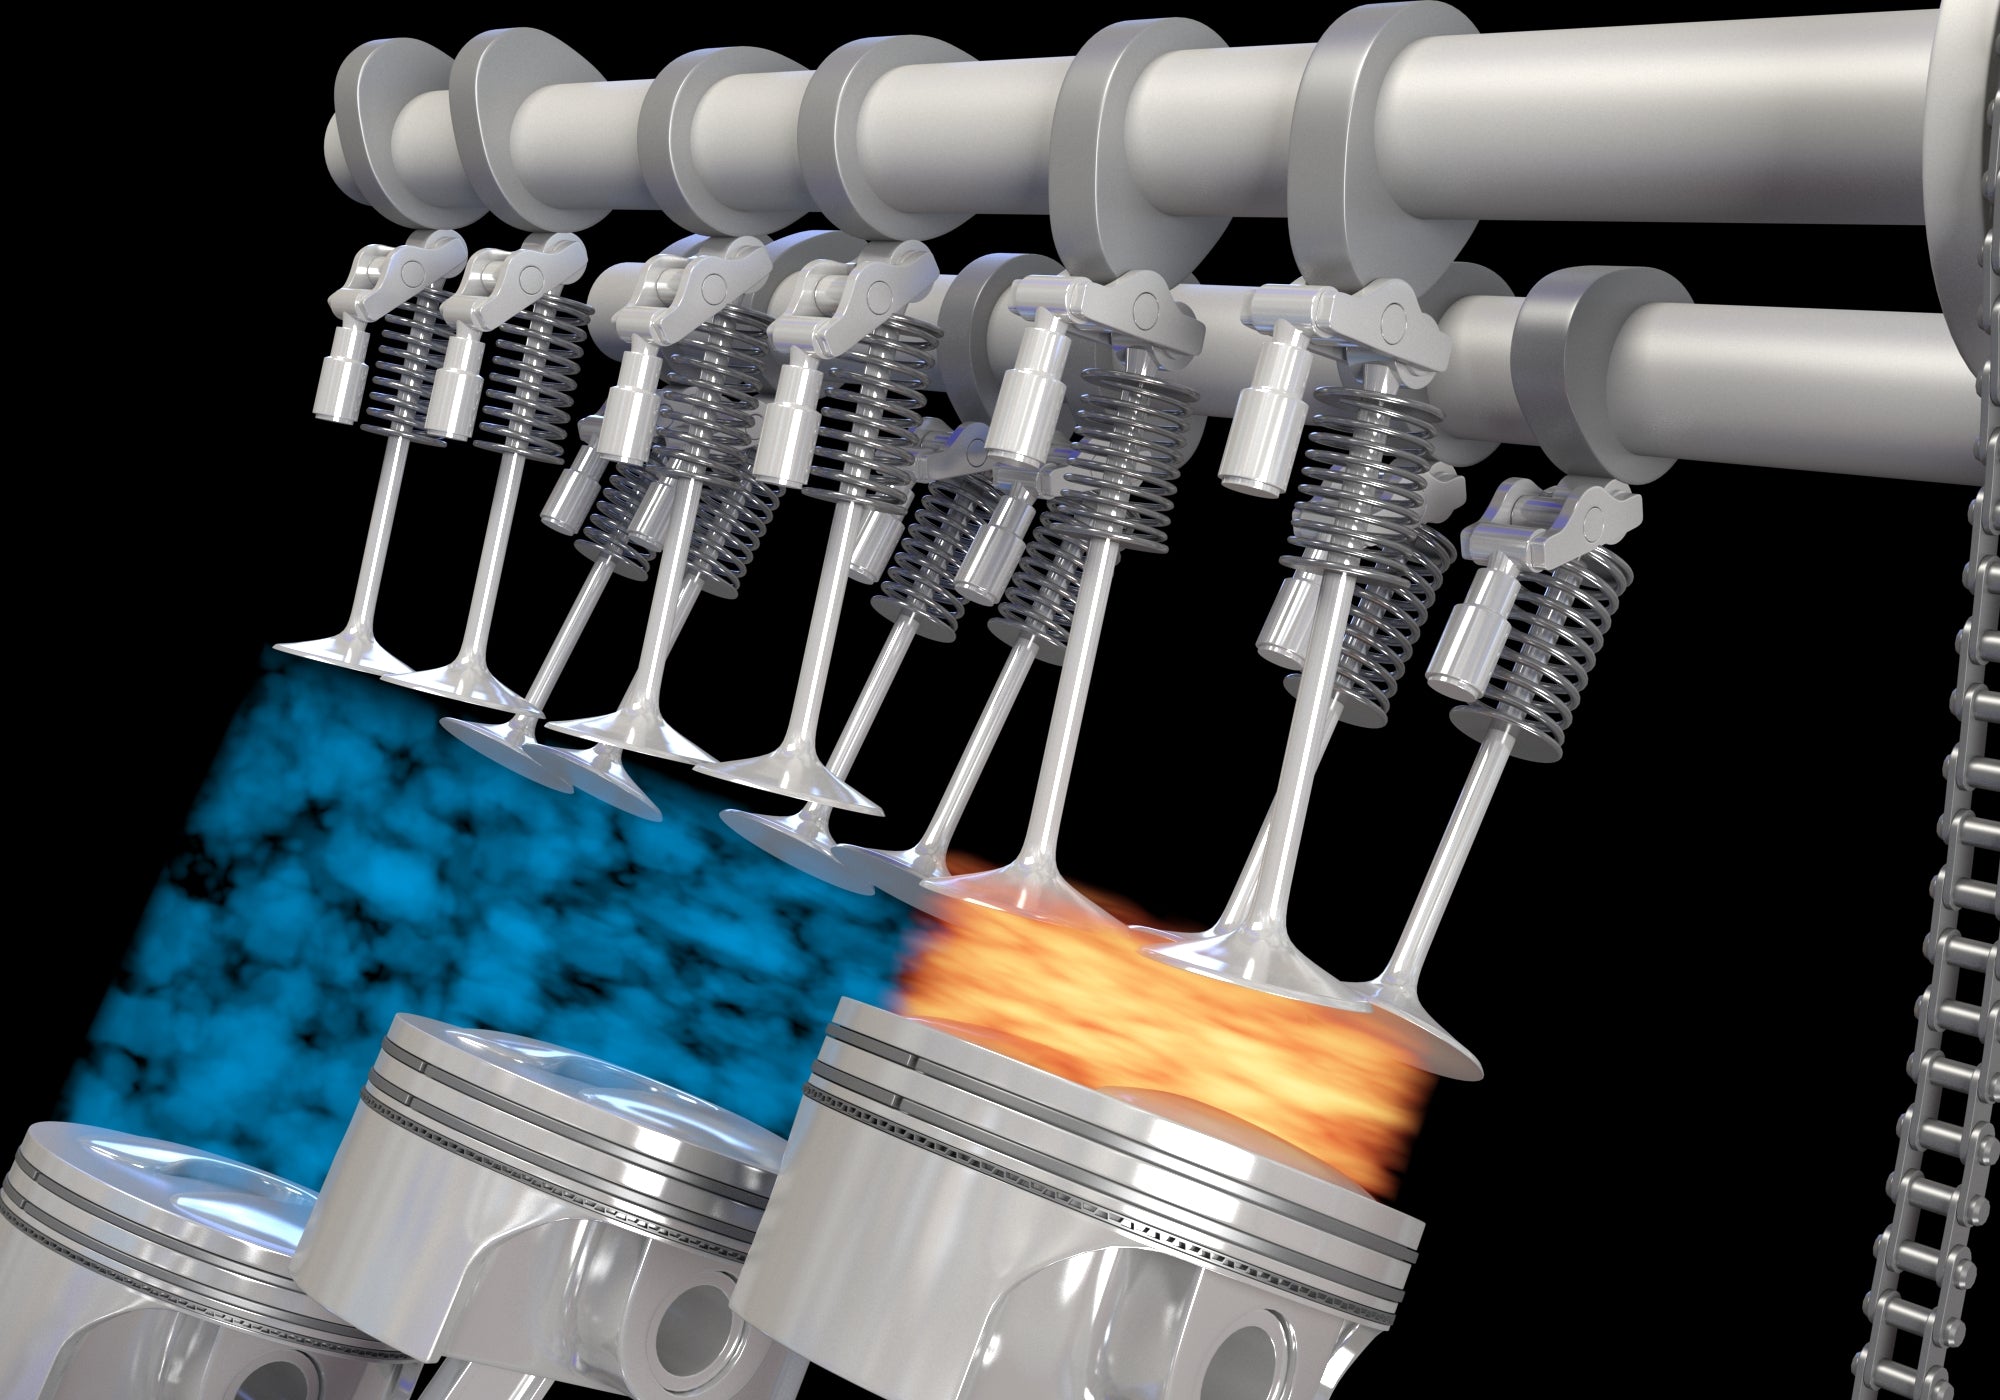 Animated V6 Engine with Ignition